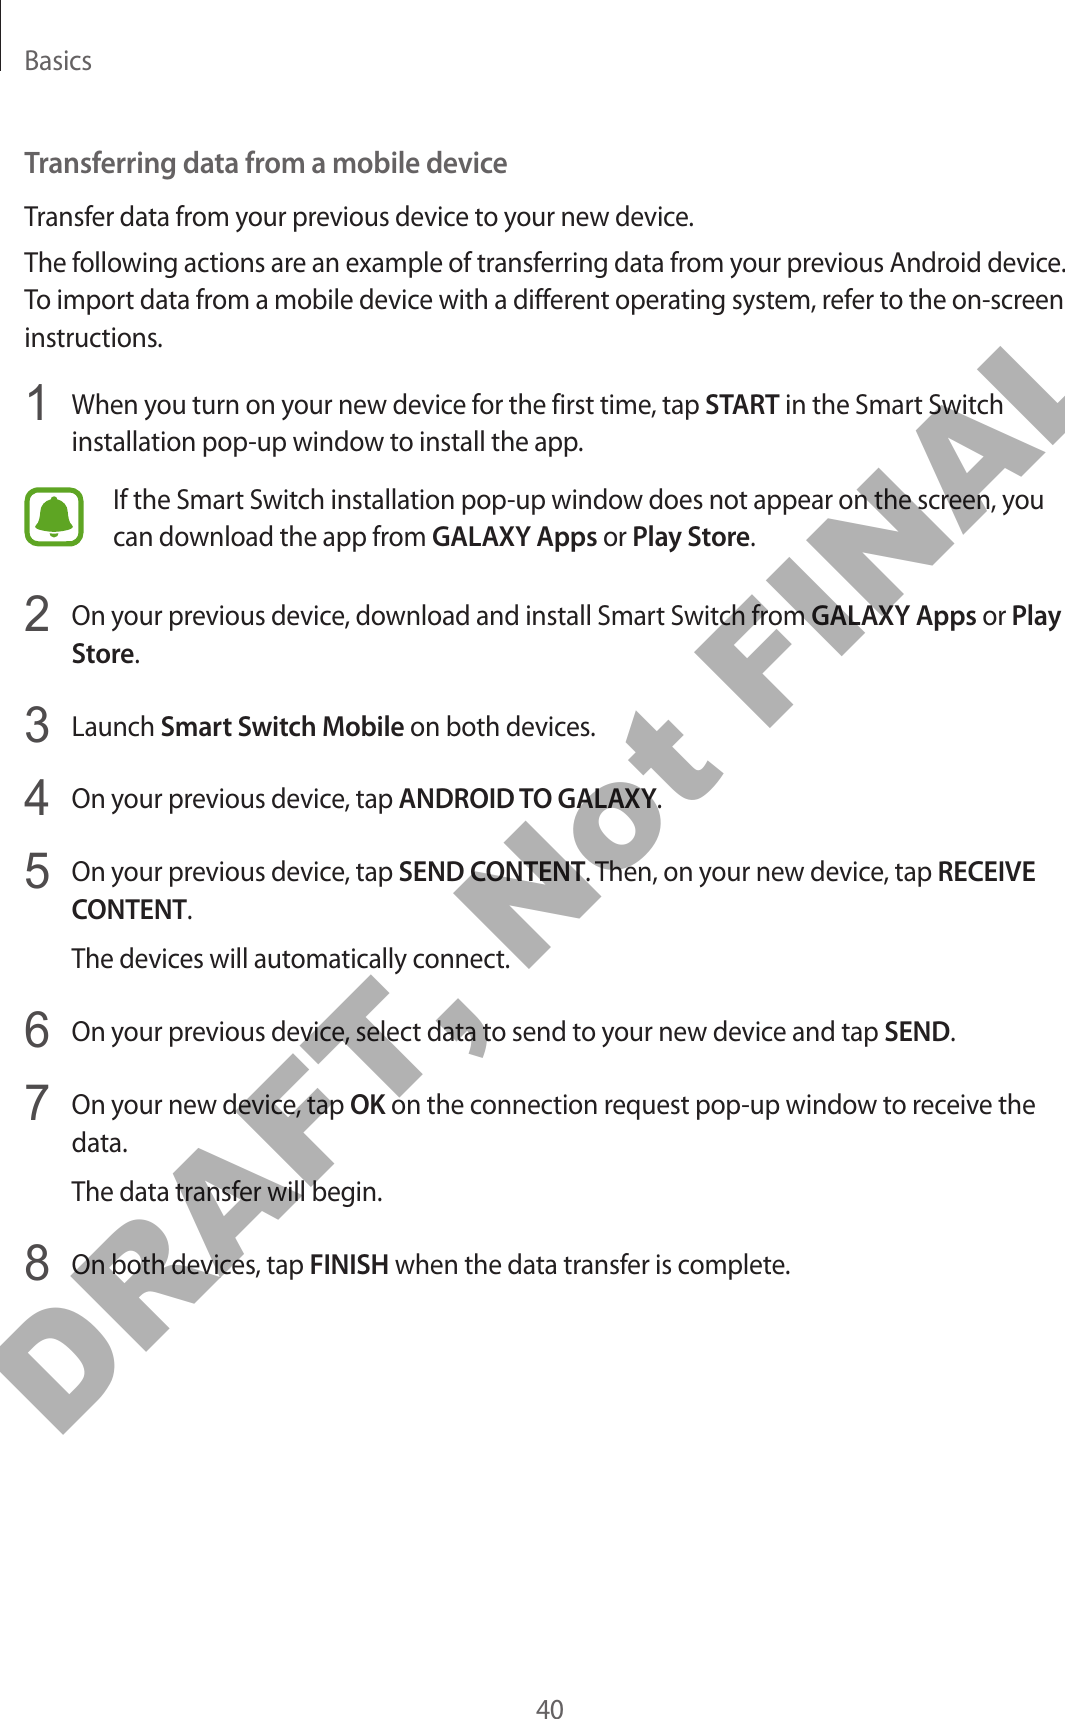 Basics40Transferring data from a mobile deviceTransfer data from your previous device to your new device.The following actions are an example of transferring data from your previous Android device. To import data from a mobile device with a different operating system, refer to the on-screen instructions.1  When you turn on your new device for the first time, tap START in the Smart Switch installation pop-up window to install the app.If the Smart Switch installation pop-up window does not appear on the screen, you can download the app from GALAXY Apps or Play Store.2  On your previous device, download and install Smart Switch from GALAXY Apps or Play Store.3  Launch Smart Switch Mobile on both devices.4  On your previous device, tap ANDROID TO GALAXY.5  On your previous device, tap SEND CONTENT. Then, on your new device, tap RECEIVE CONTENT.The devices will automatically connect.6  On your previous device, select data to send to your new device and tap SEND.7  On your new device, tap OK on the connection request pop-up window to receive the data.The data transfer will begin.8  On both devices, tap FINISH when the data transfer is complete.DRAFT, Not FINAL